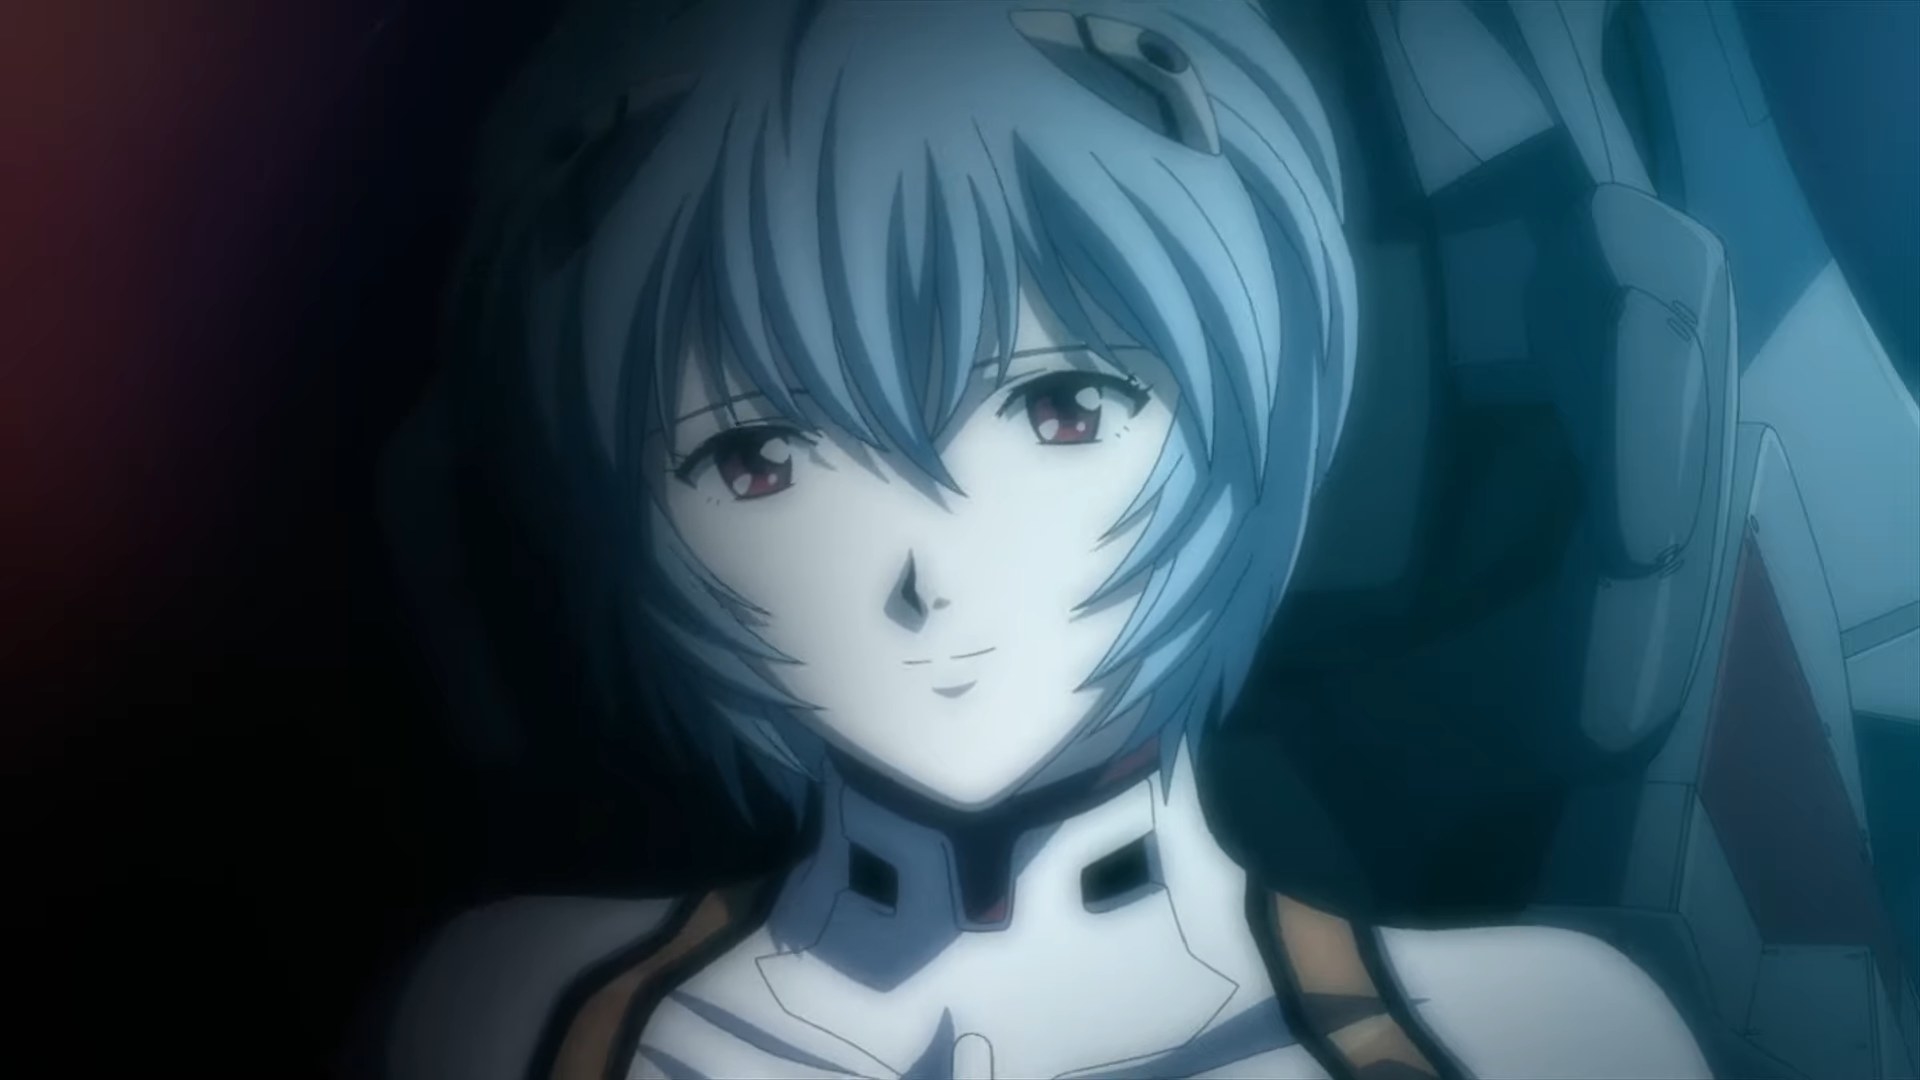 Rei smiling in &quot;Evangelion: 1.0 You Are (Not) Alone&quot;